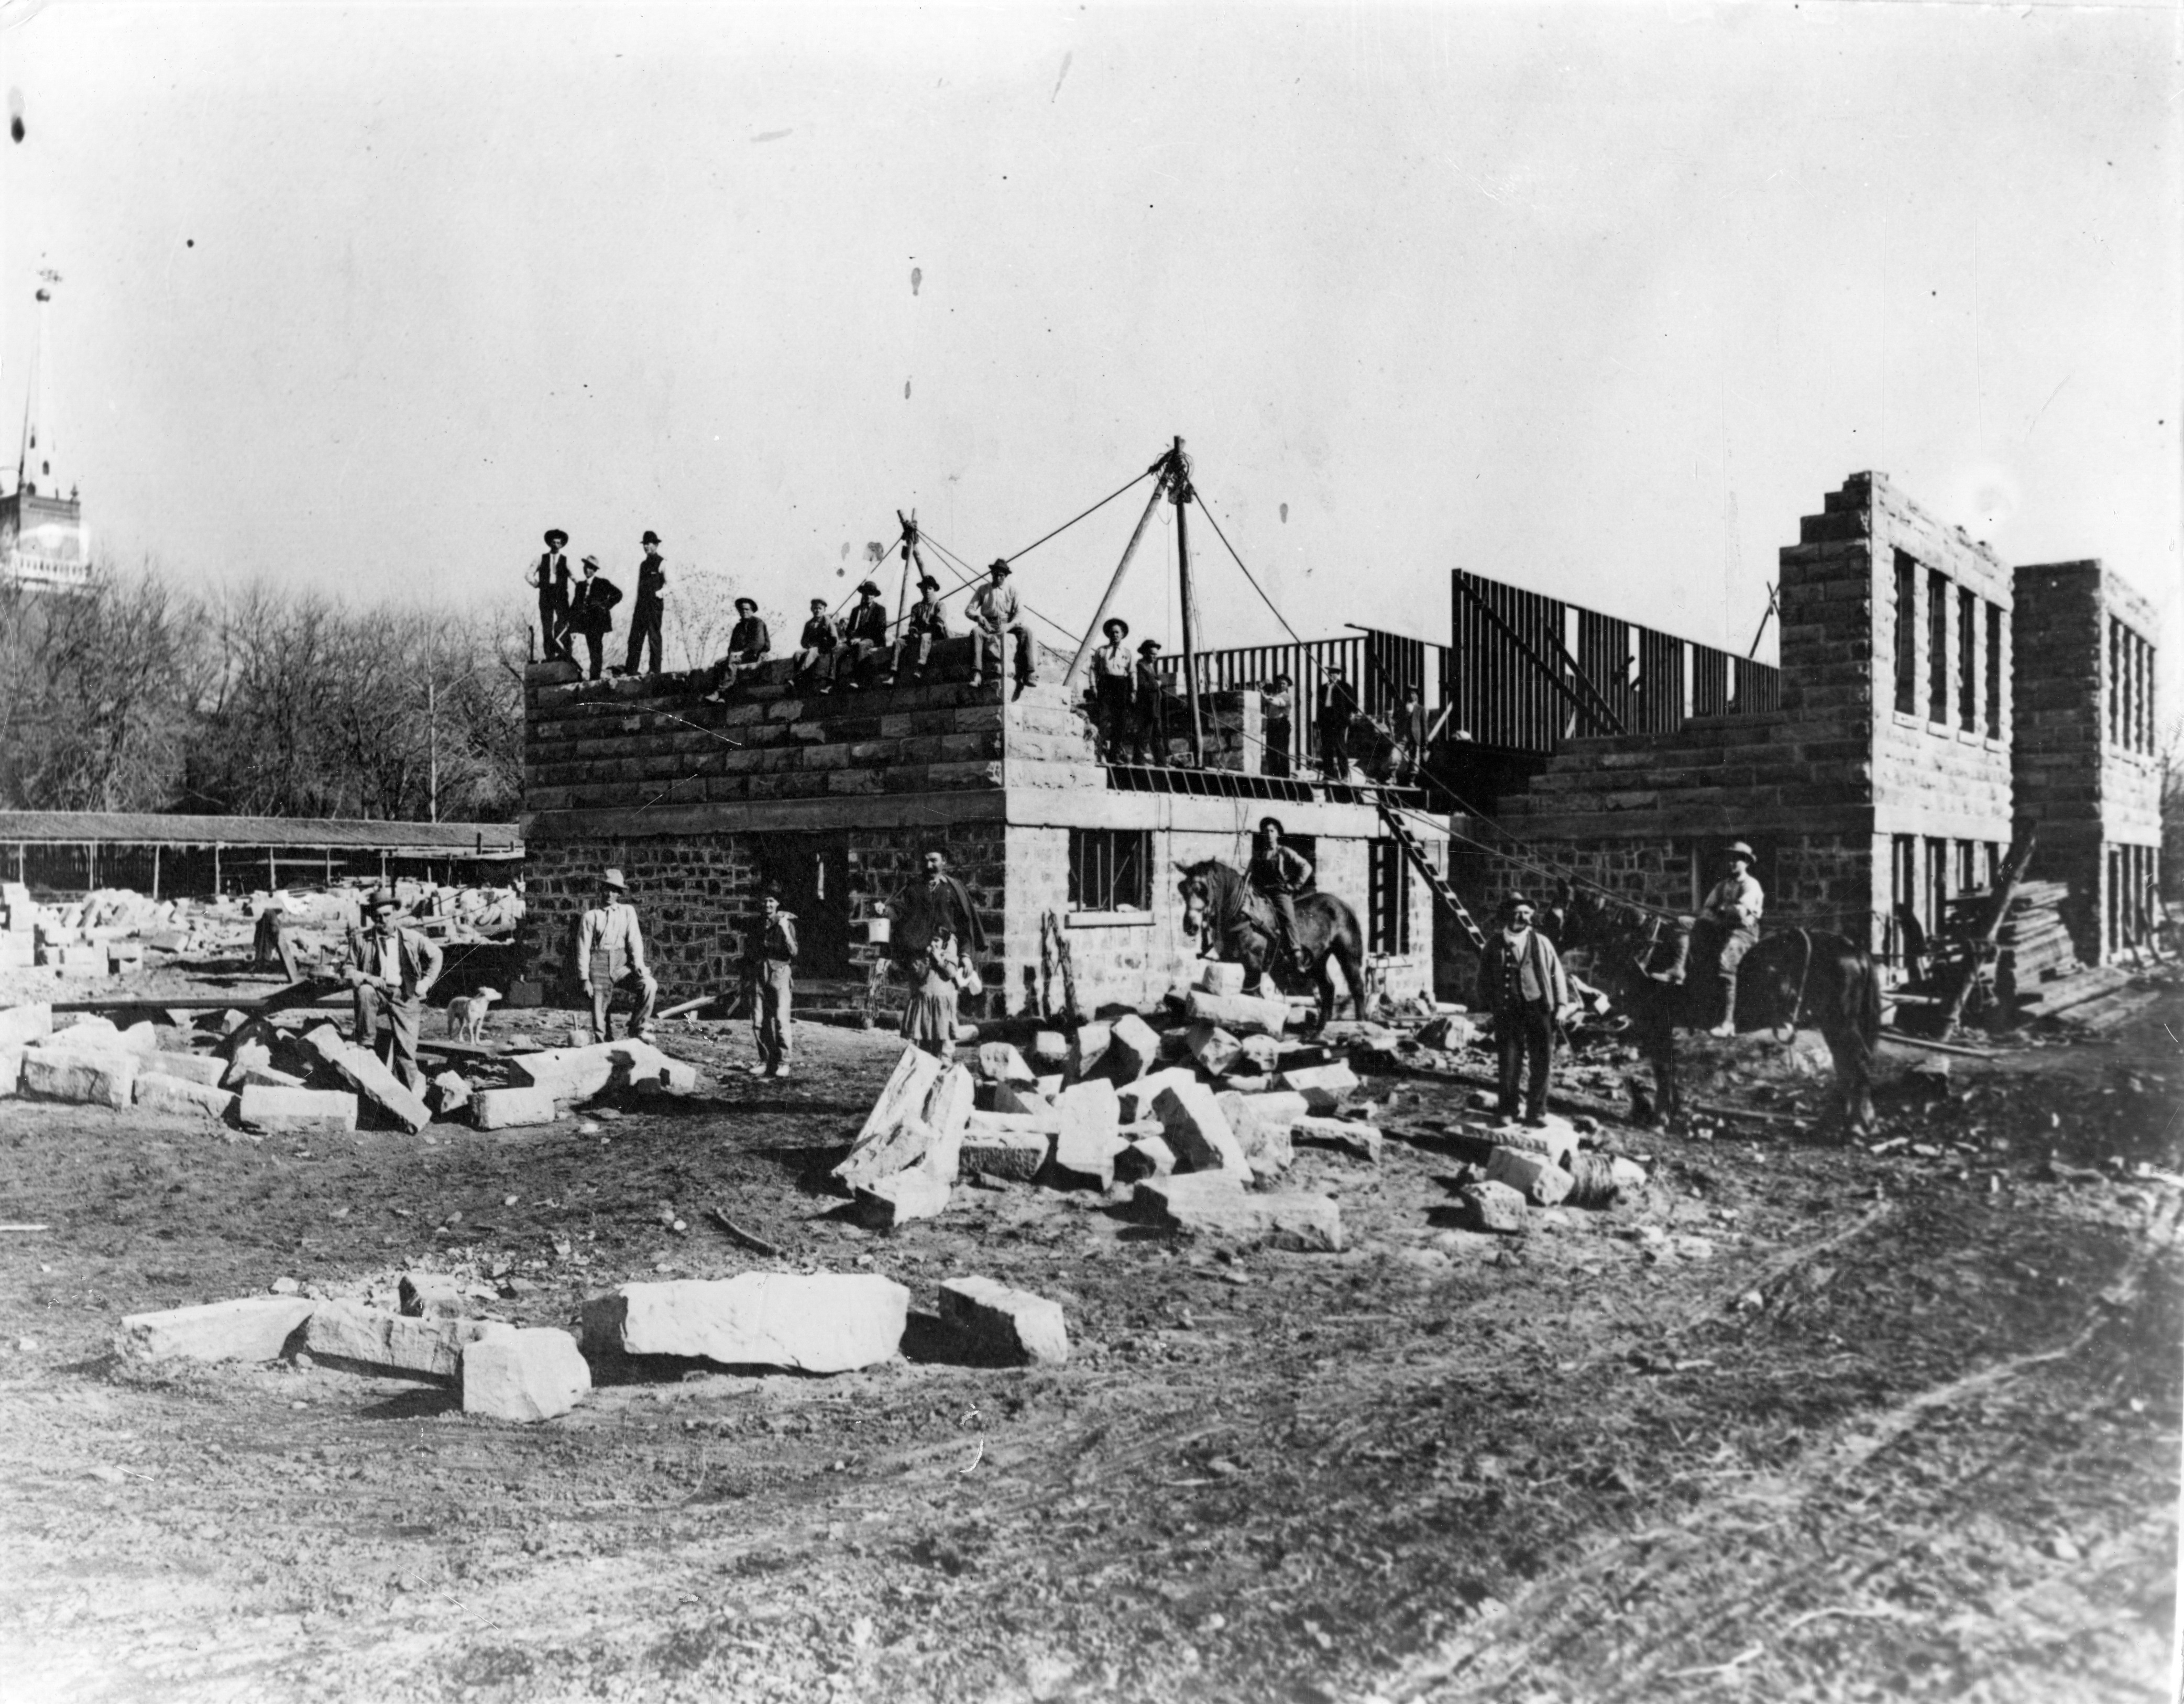 The old Dixie Academy building under construction in 1910